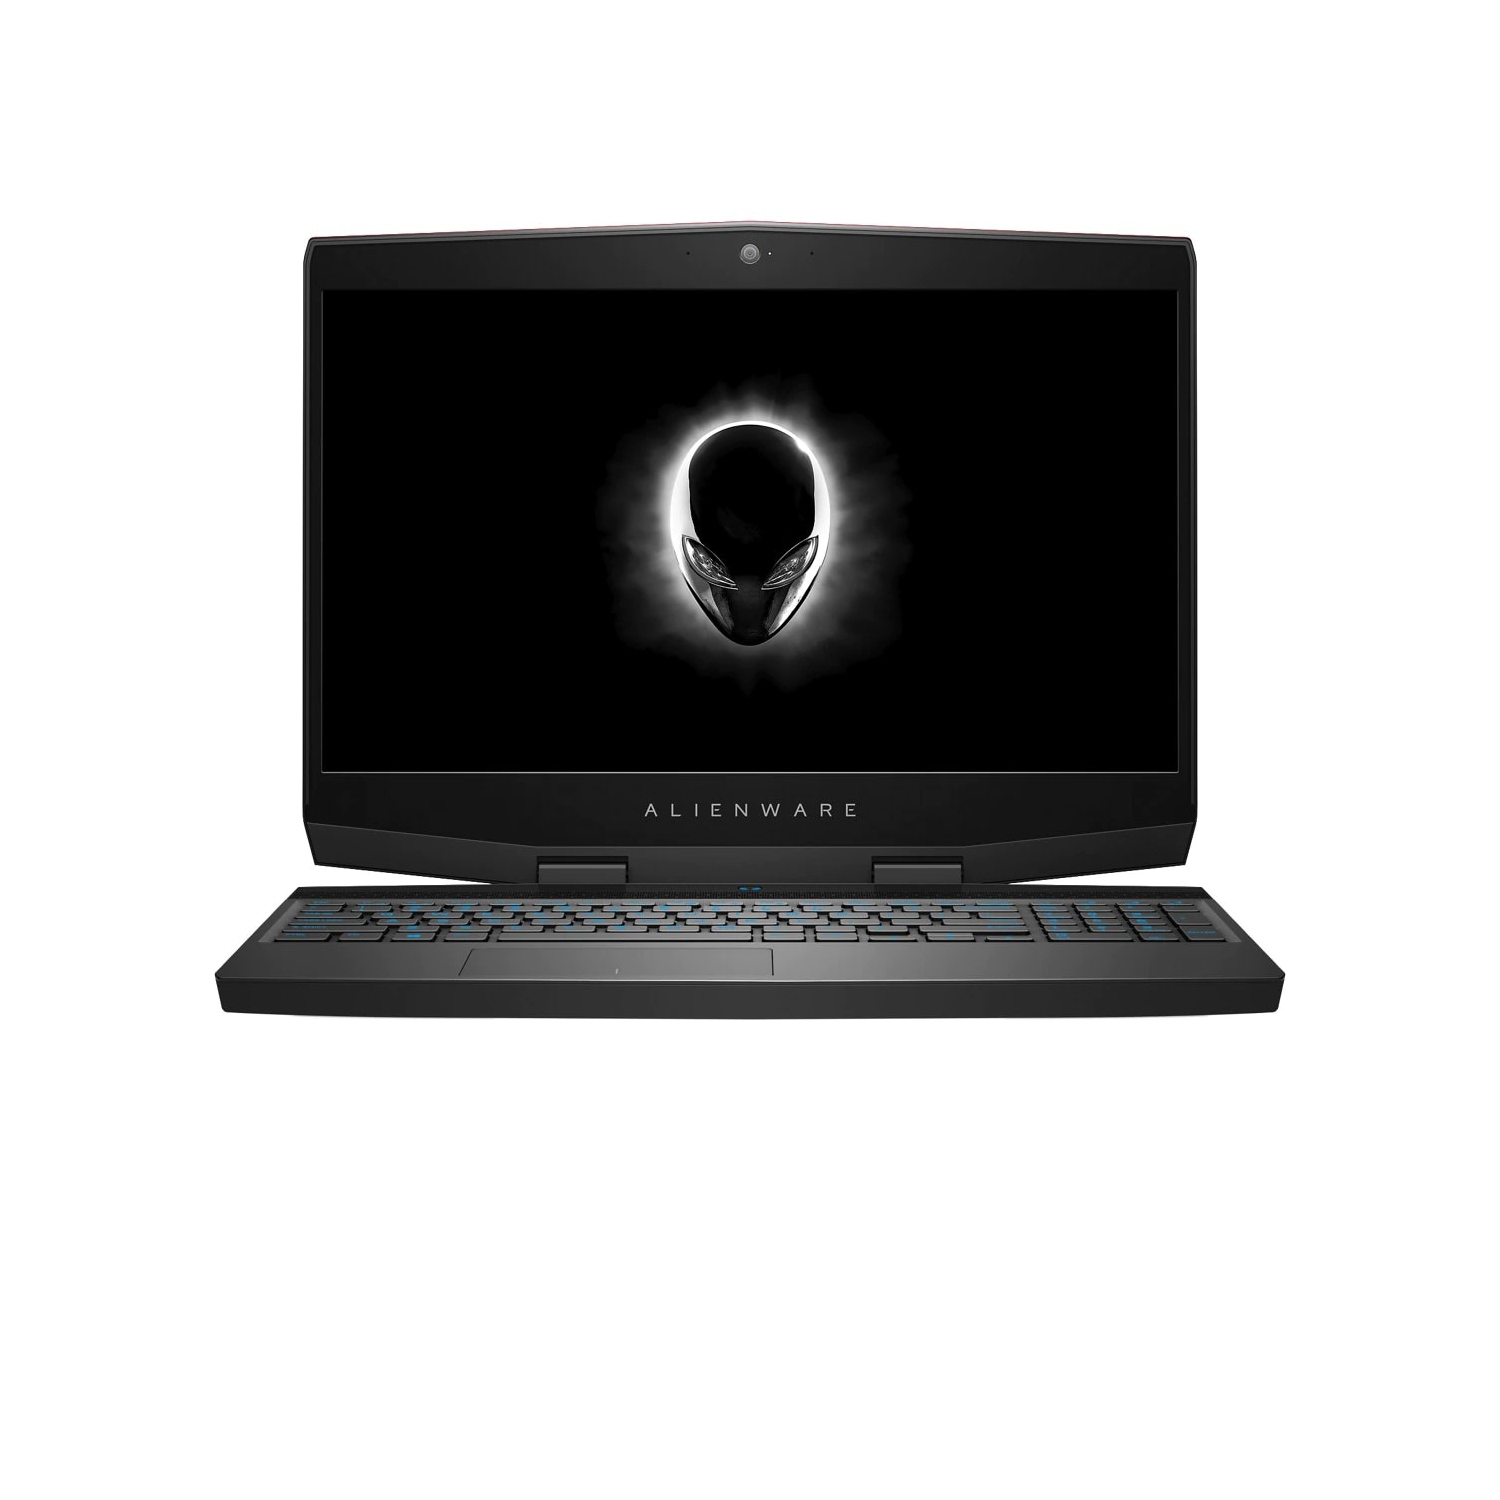 Refurbished (Excellent) – Dell Alienware m15 Gaming Laptop (2018) | 15.6" FHD | Core i7 - 128GB SSD + 1TB HDD - 16GB RAM - GTX 1070 | 6 Cores @ 4.1 GHz - 8GB GDDR5